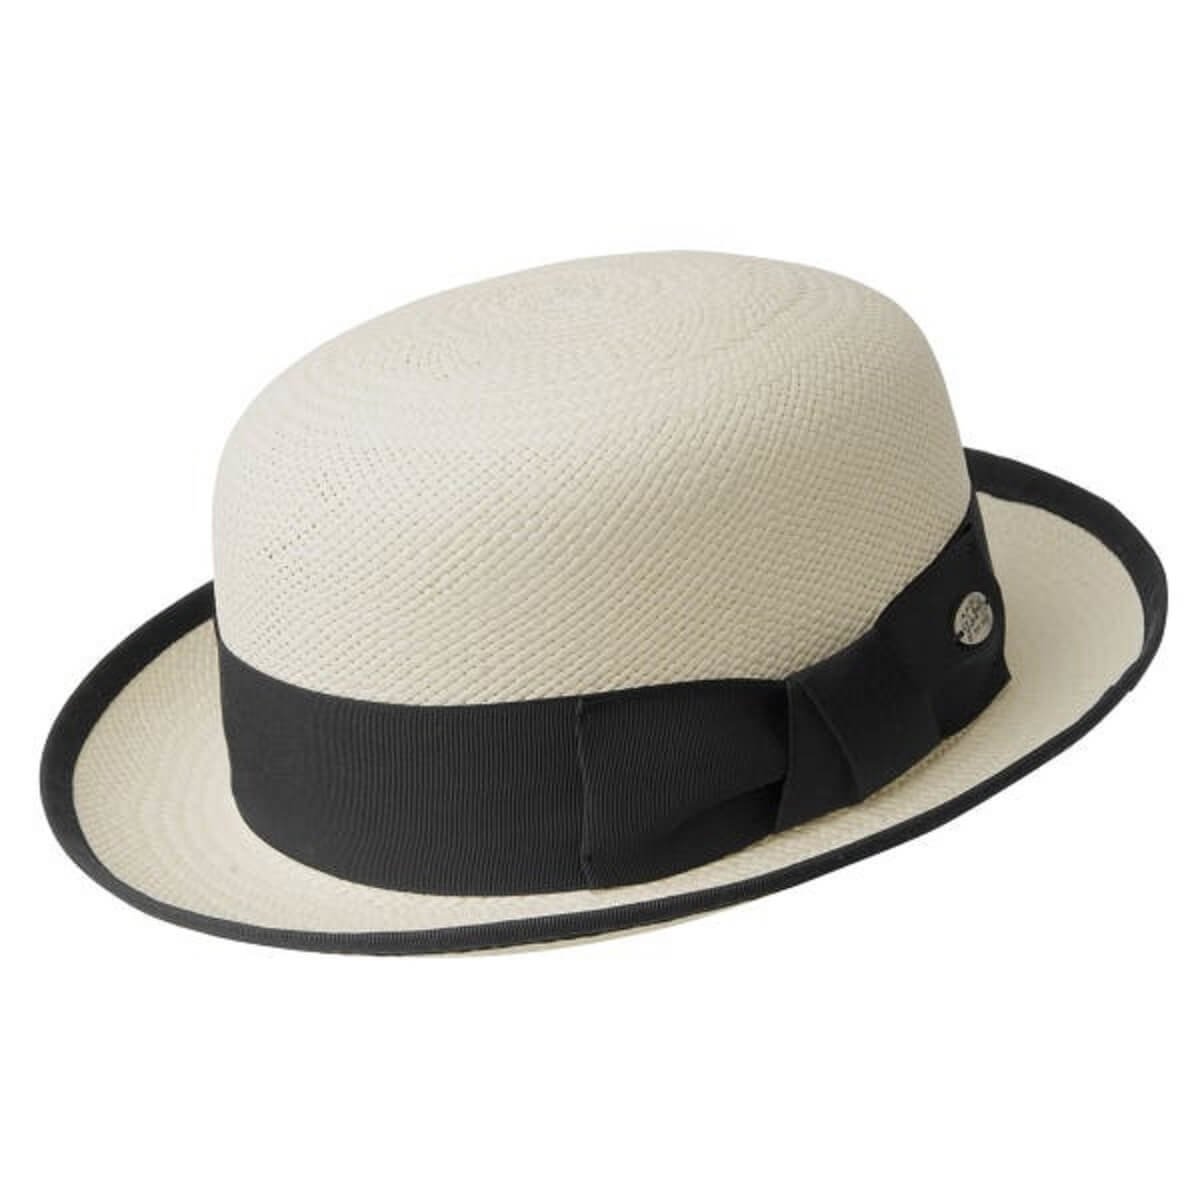 Our Mens Summer Hats Bring the Swag to Your Outfit